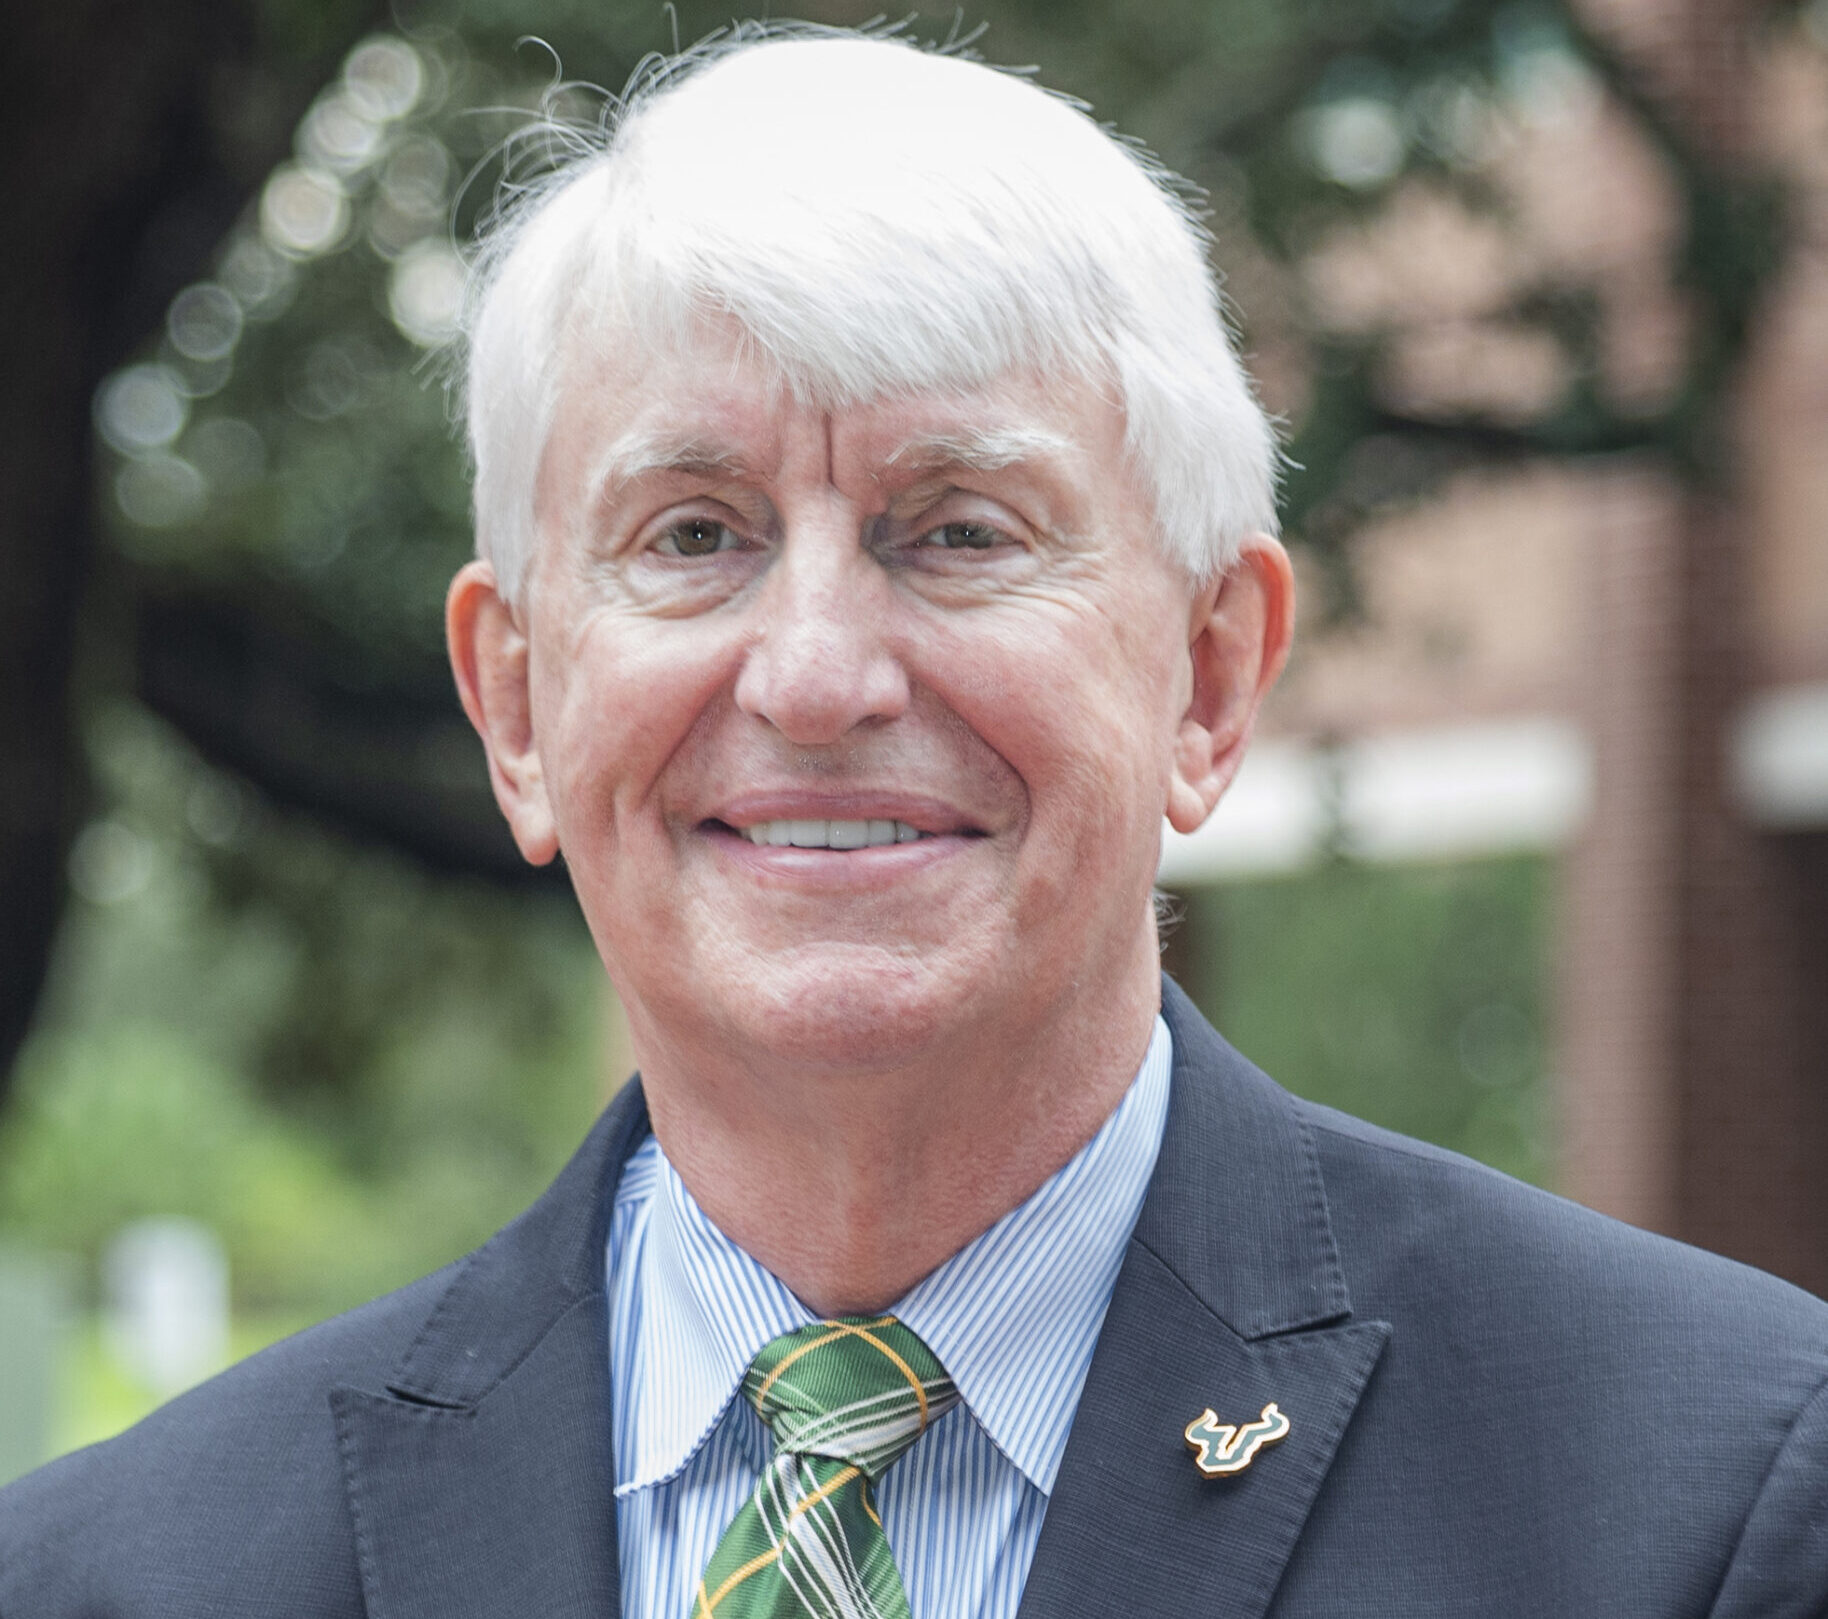 Looking ahead: Provost Wilcox’s aspirations for USF’s future